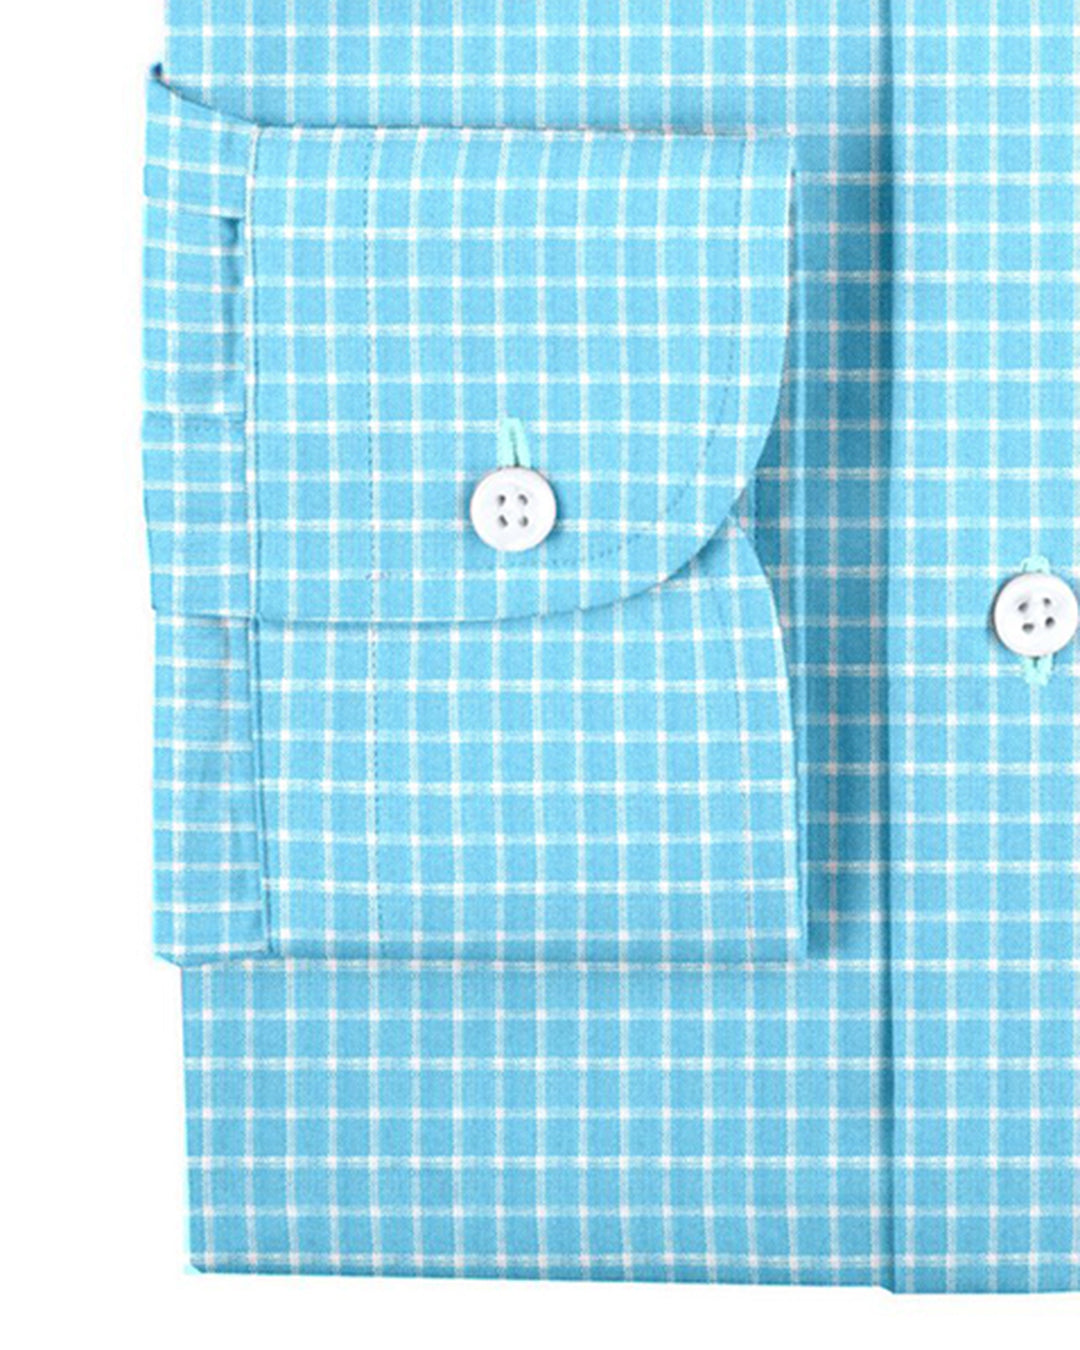 Cuff of the custom linen shirt for men in teal and blue checks by Luxire Clothing